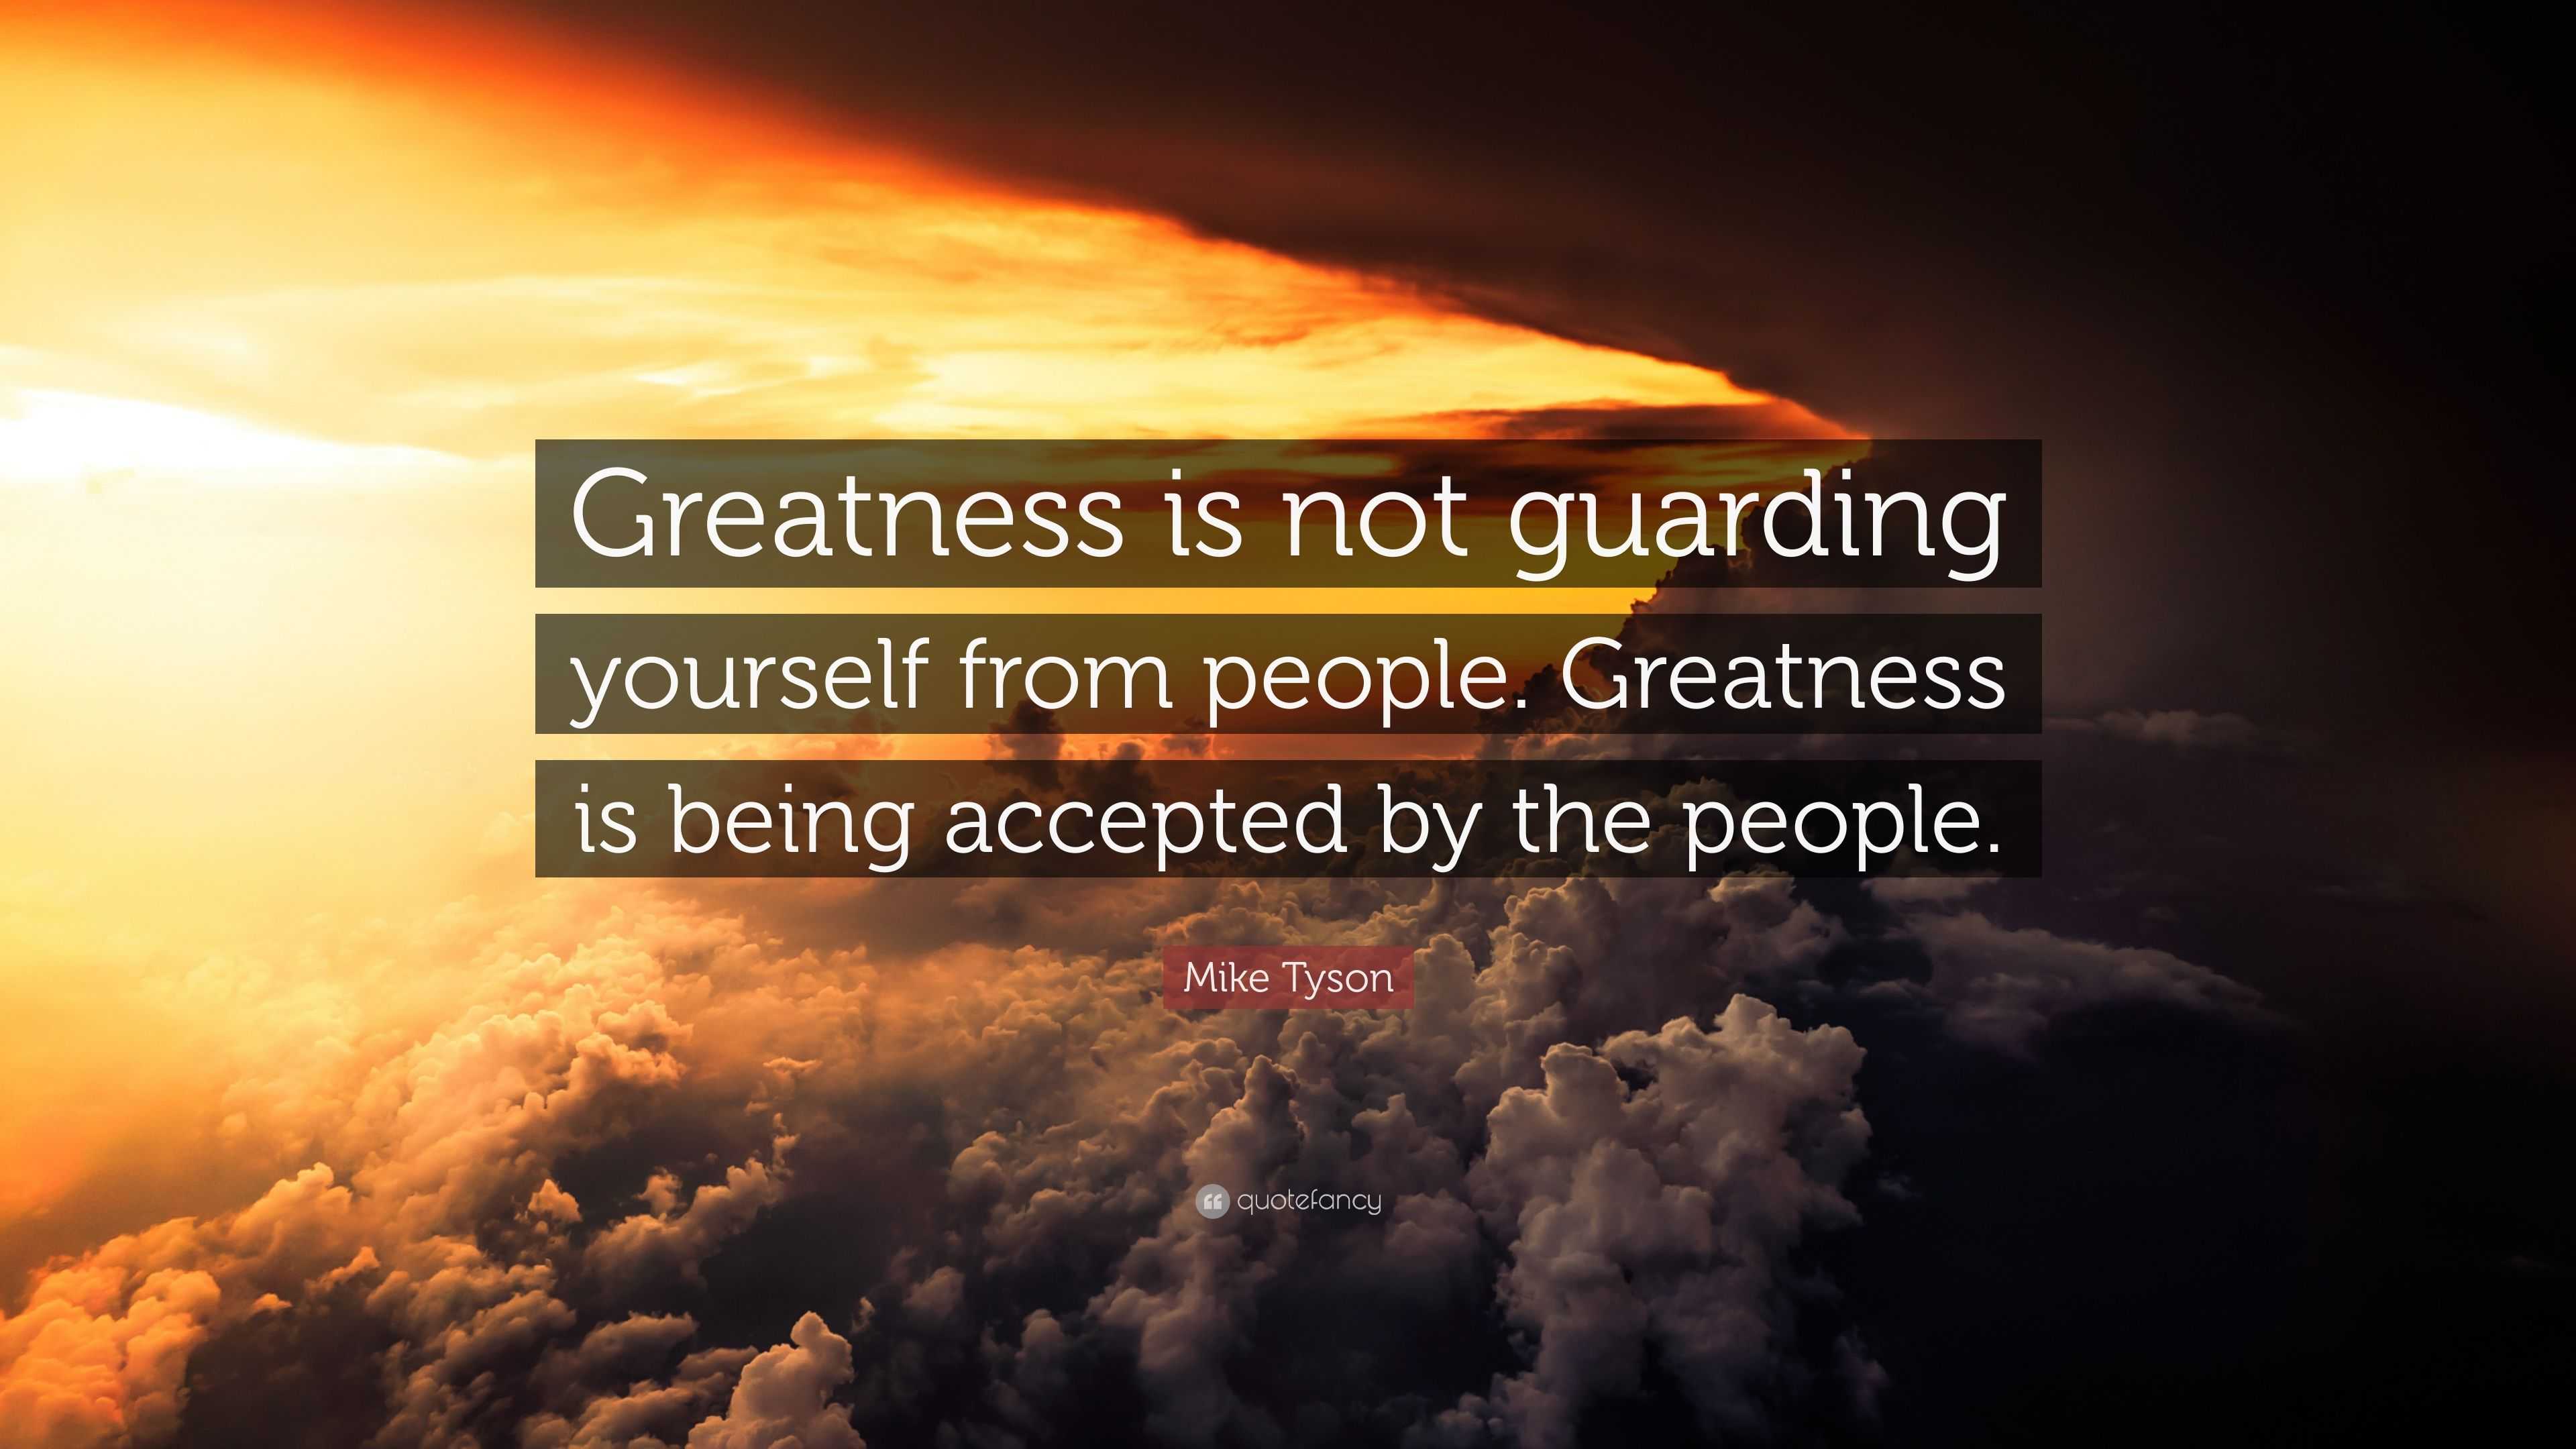 Mike Tyson Quote: “Greatness is not guarding yourself from people ...